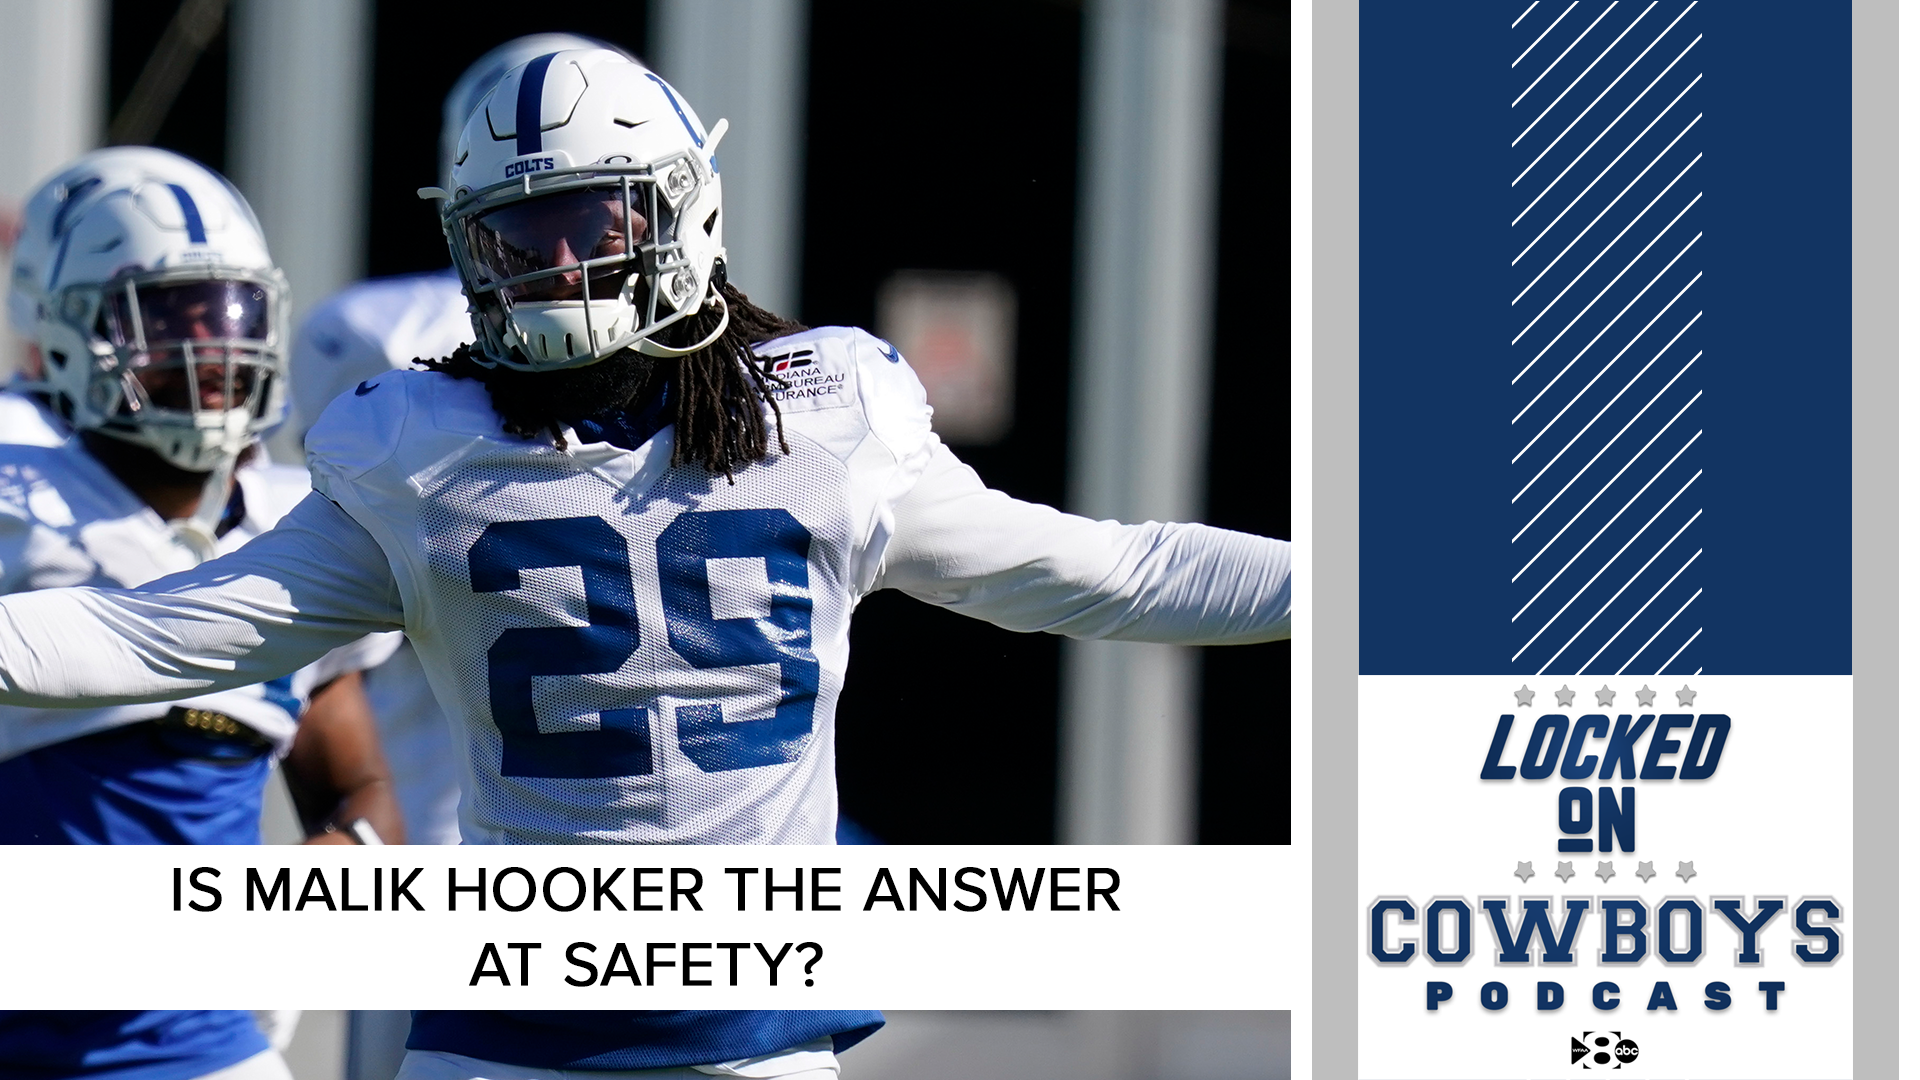 How will Malik Hooker impact the Cowboys' defense in 2021? @Marcus_Mosher and @McCoolBCB discuss the latest signing on Locked On Cowboys Podcast.